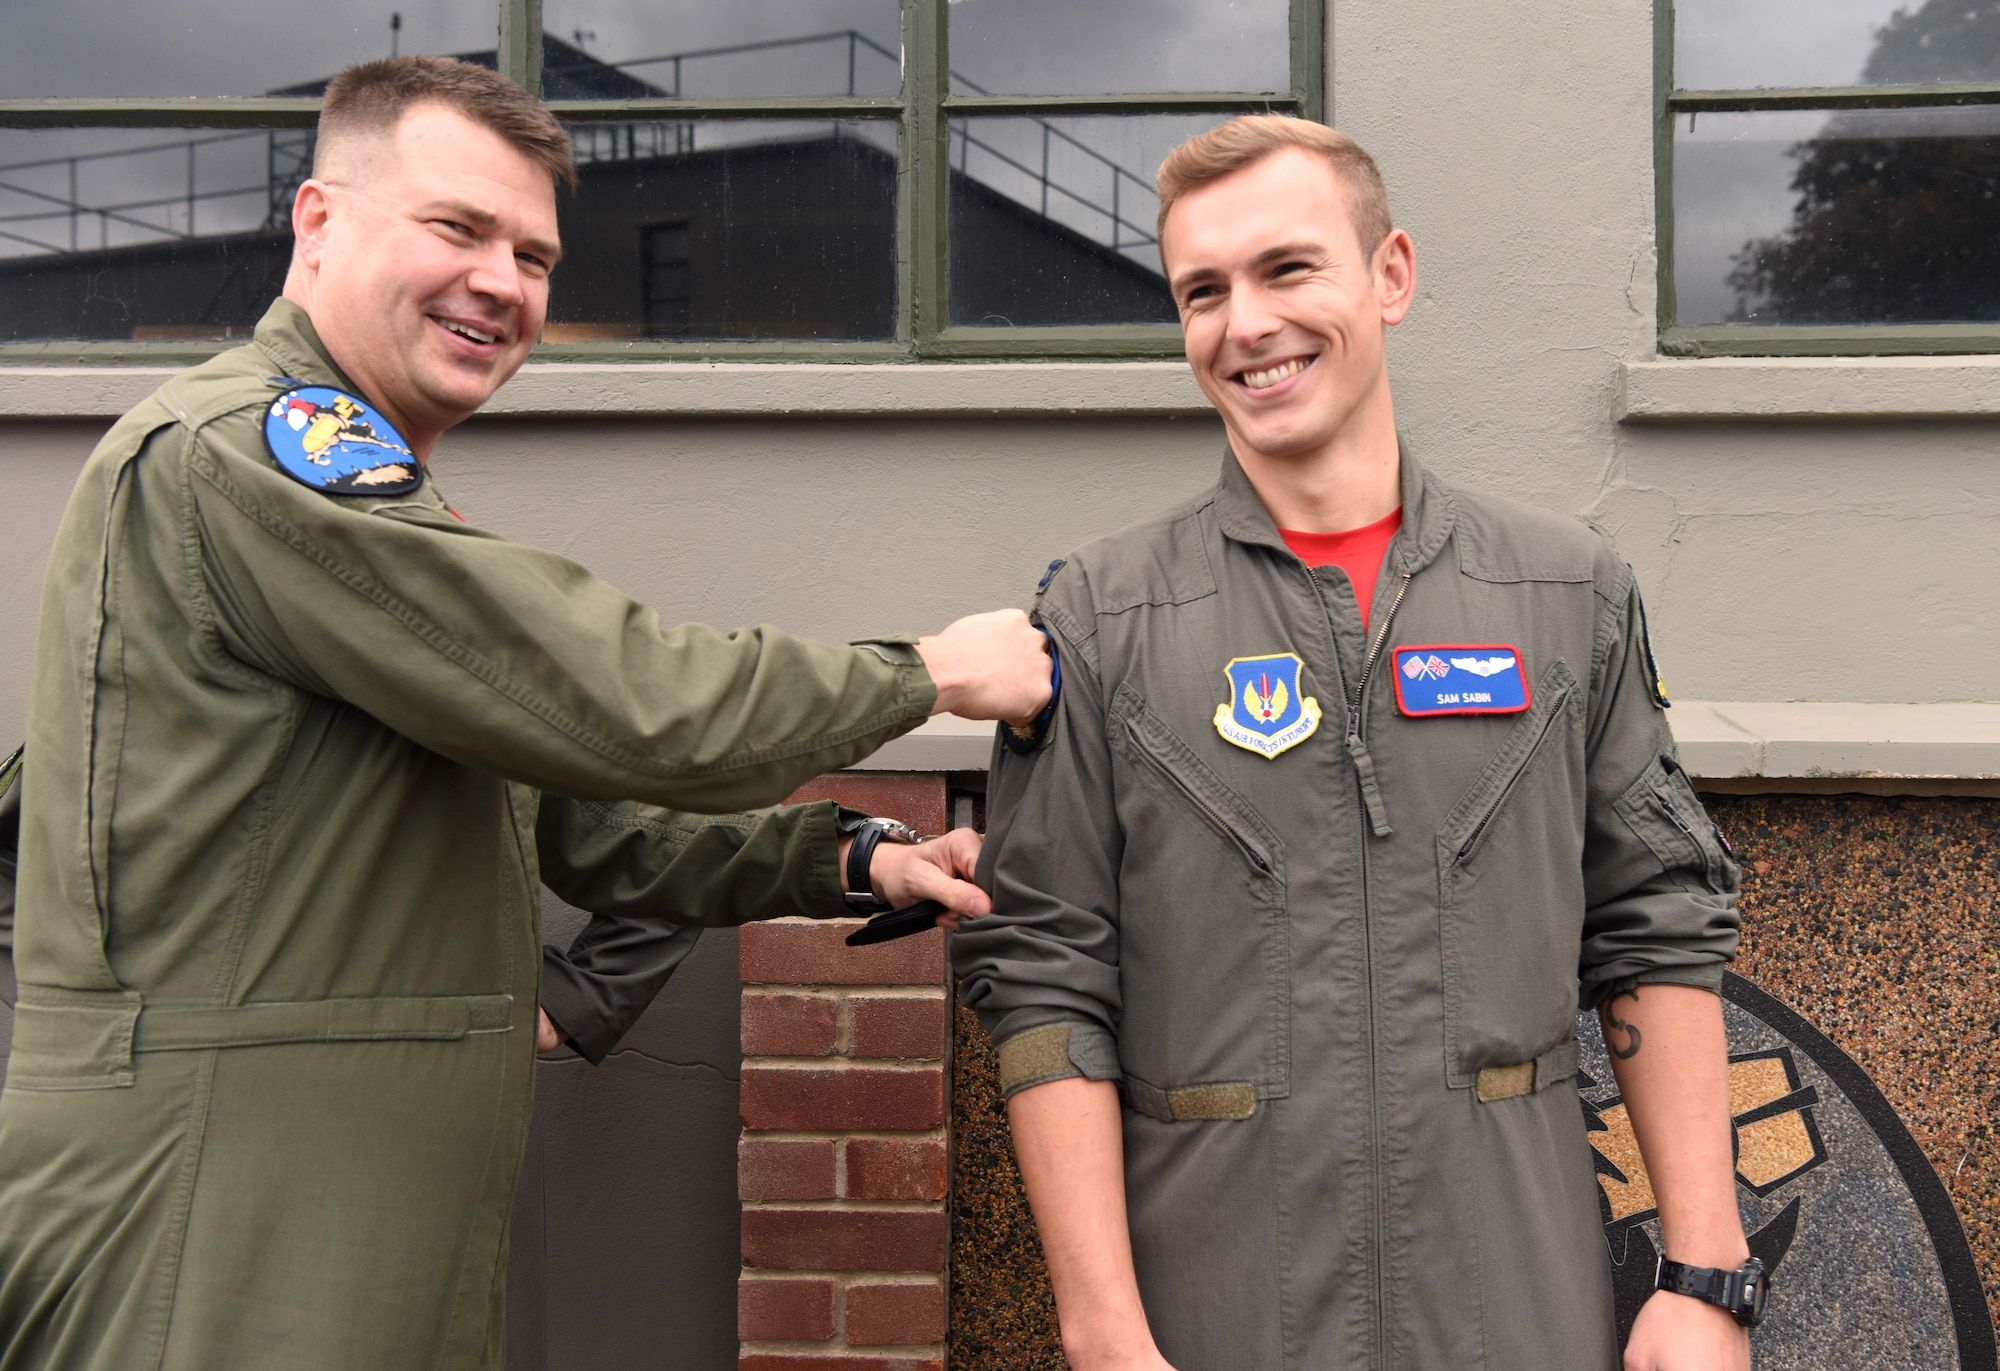 U.S. Air Force Lt. Col. Tyler Berge, left, 351st Air Refueling Squadron commander, presents the squadron heritage “Buzzard” patch to Capt. Sam Sabin, 351st ARS executive officer, at the 100th Bomb Group Memorial Museum, Thorpe Abbotts, England, Oct. 14, 2022. The Buzzard heritage patch is presented to pilots and boom operators who have completed mission certification training. Thorpe Abbotts was home to the original 351st Bomb Squadron and 100th Bomb Group during World War II. (U.S. Air Force photo by Karen Abeyasekere)